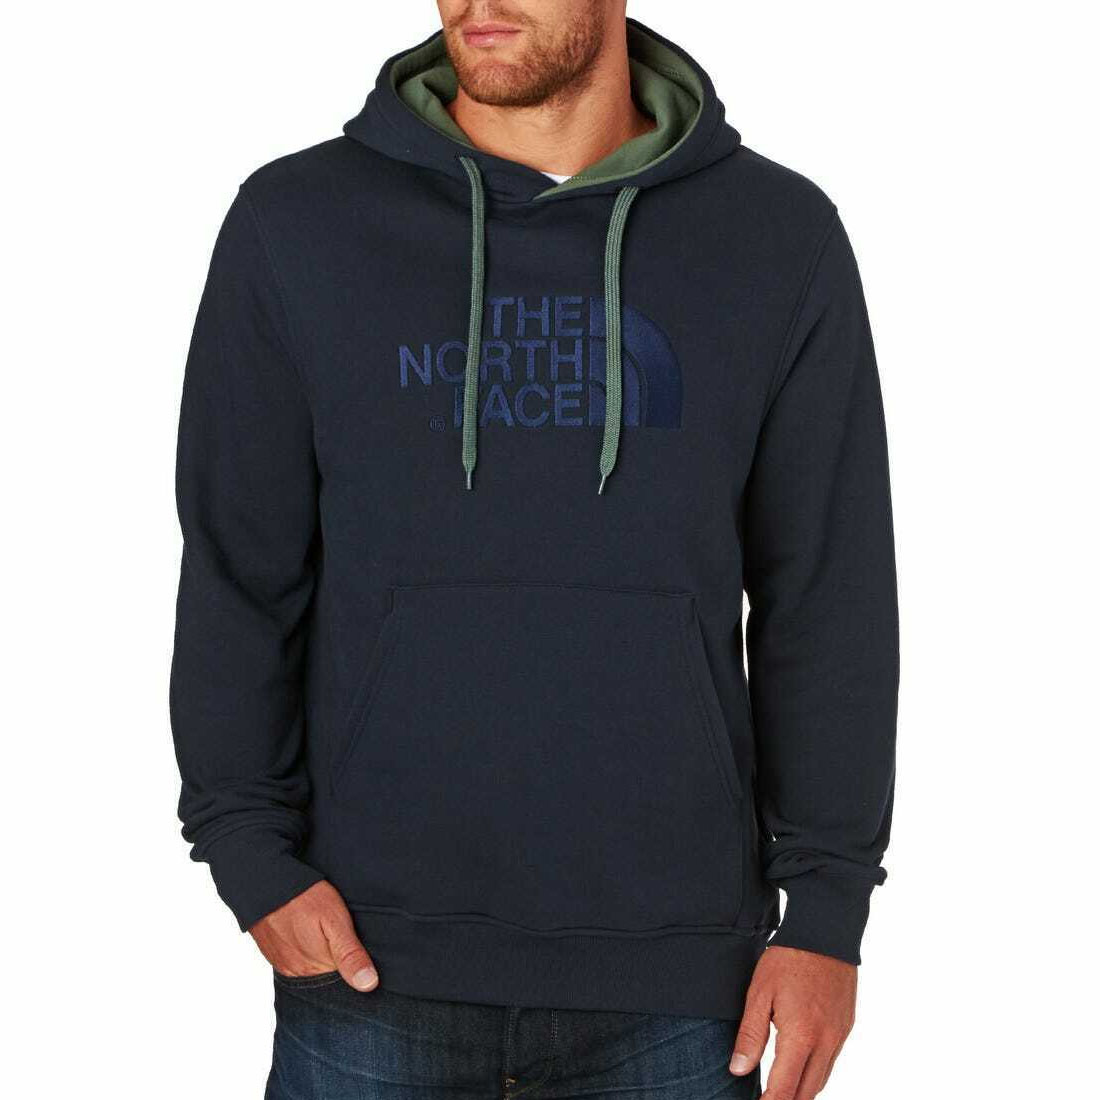 north face hoodie navy blue